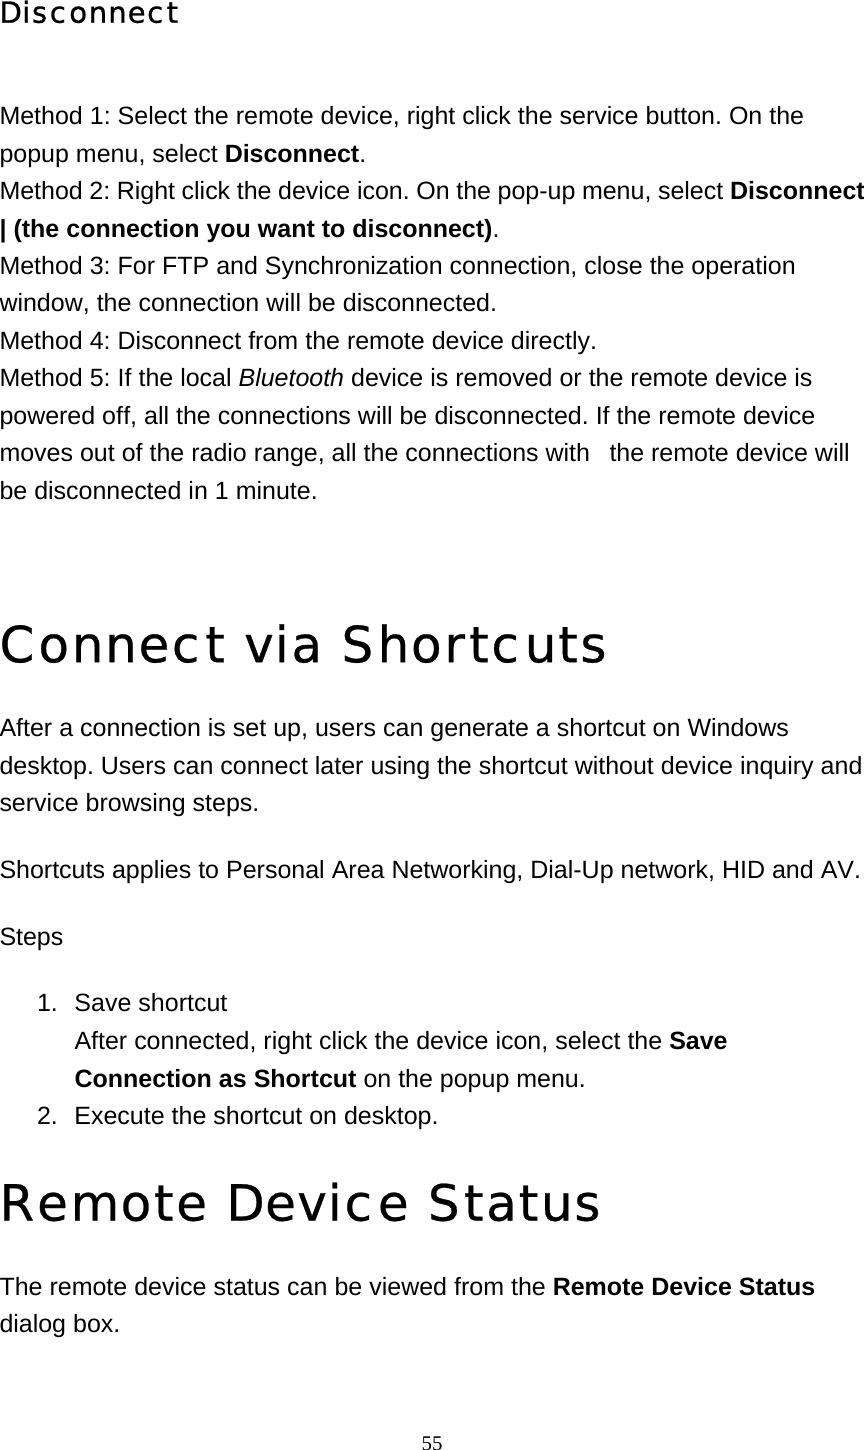   55Disconnect Method 1: Select the remote device, right click the service button. On the popup menu, select Disconnect. Method 2: Right click the device icon. On the pop-up menu, select Disconnect | (the connection you want to disconnect). Method 3: For FTP and Synchronization connection, close the operation window, the connection will be disconnected. Method 4: Disconnect from the remote device directly. Method 5: If the local Bluetooth device is removed or the remote device is powered off, all the connections will be disconnected. If the remote device moves out of the radio range, all the connections with   the remote device will be disconnected in 1 minute.   Connect via Shortcuts After a connection is set up, users can generate a shortcut on Windows desktop. Users can connect later using the shortcut without device inquiry and service browsing steps.  Shortcuts applies to Personal Area Networking, Dial-Up network, HID and AV. Steps 1. Save shortcut After connected, right click the device icon, select the Save Connection as Shortcut on the popup menu.   2.  Execute the shortcut on desktop.   Remote Device Status The remote device status can be viewed from the Remote Device Status dialog box. 